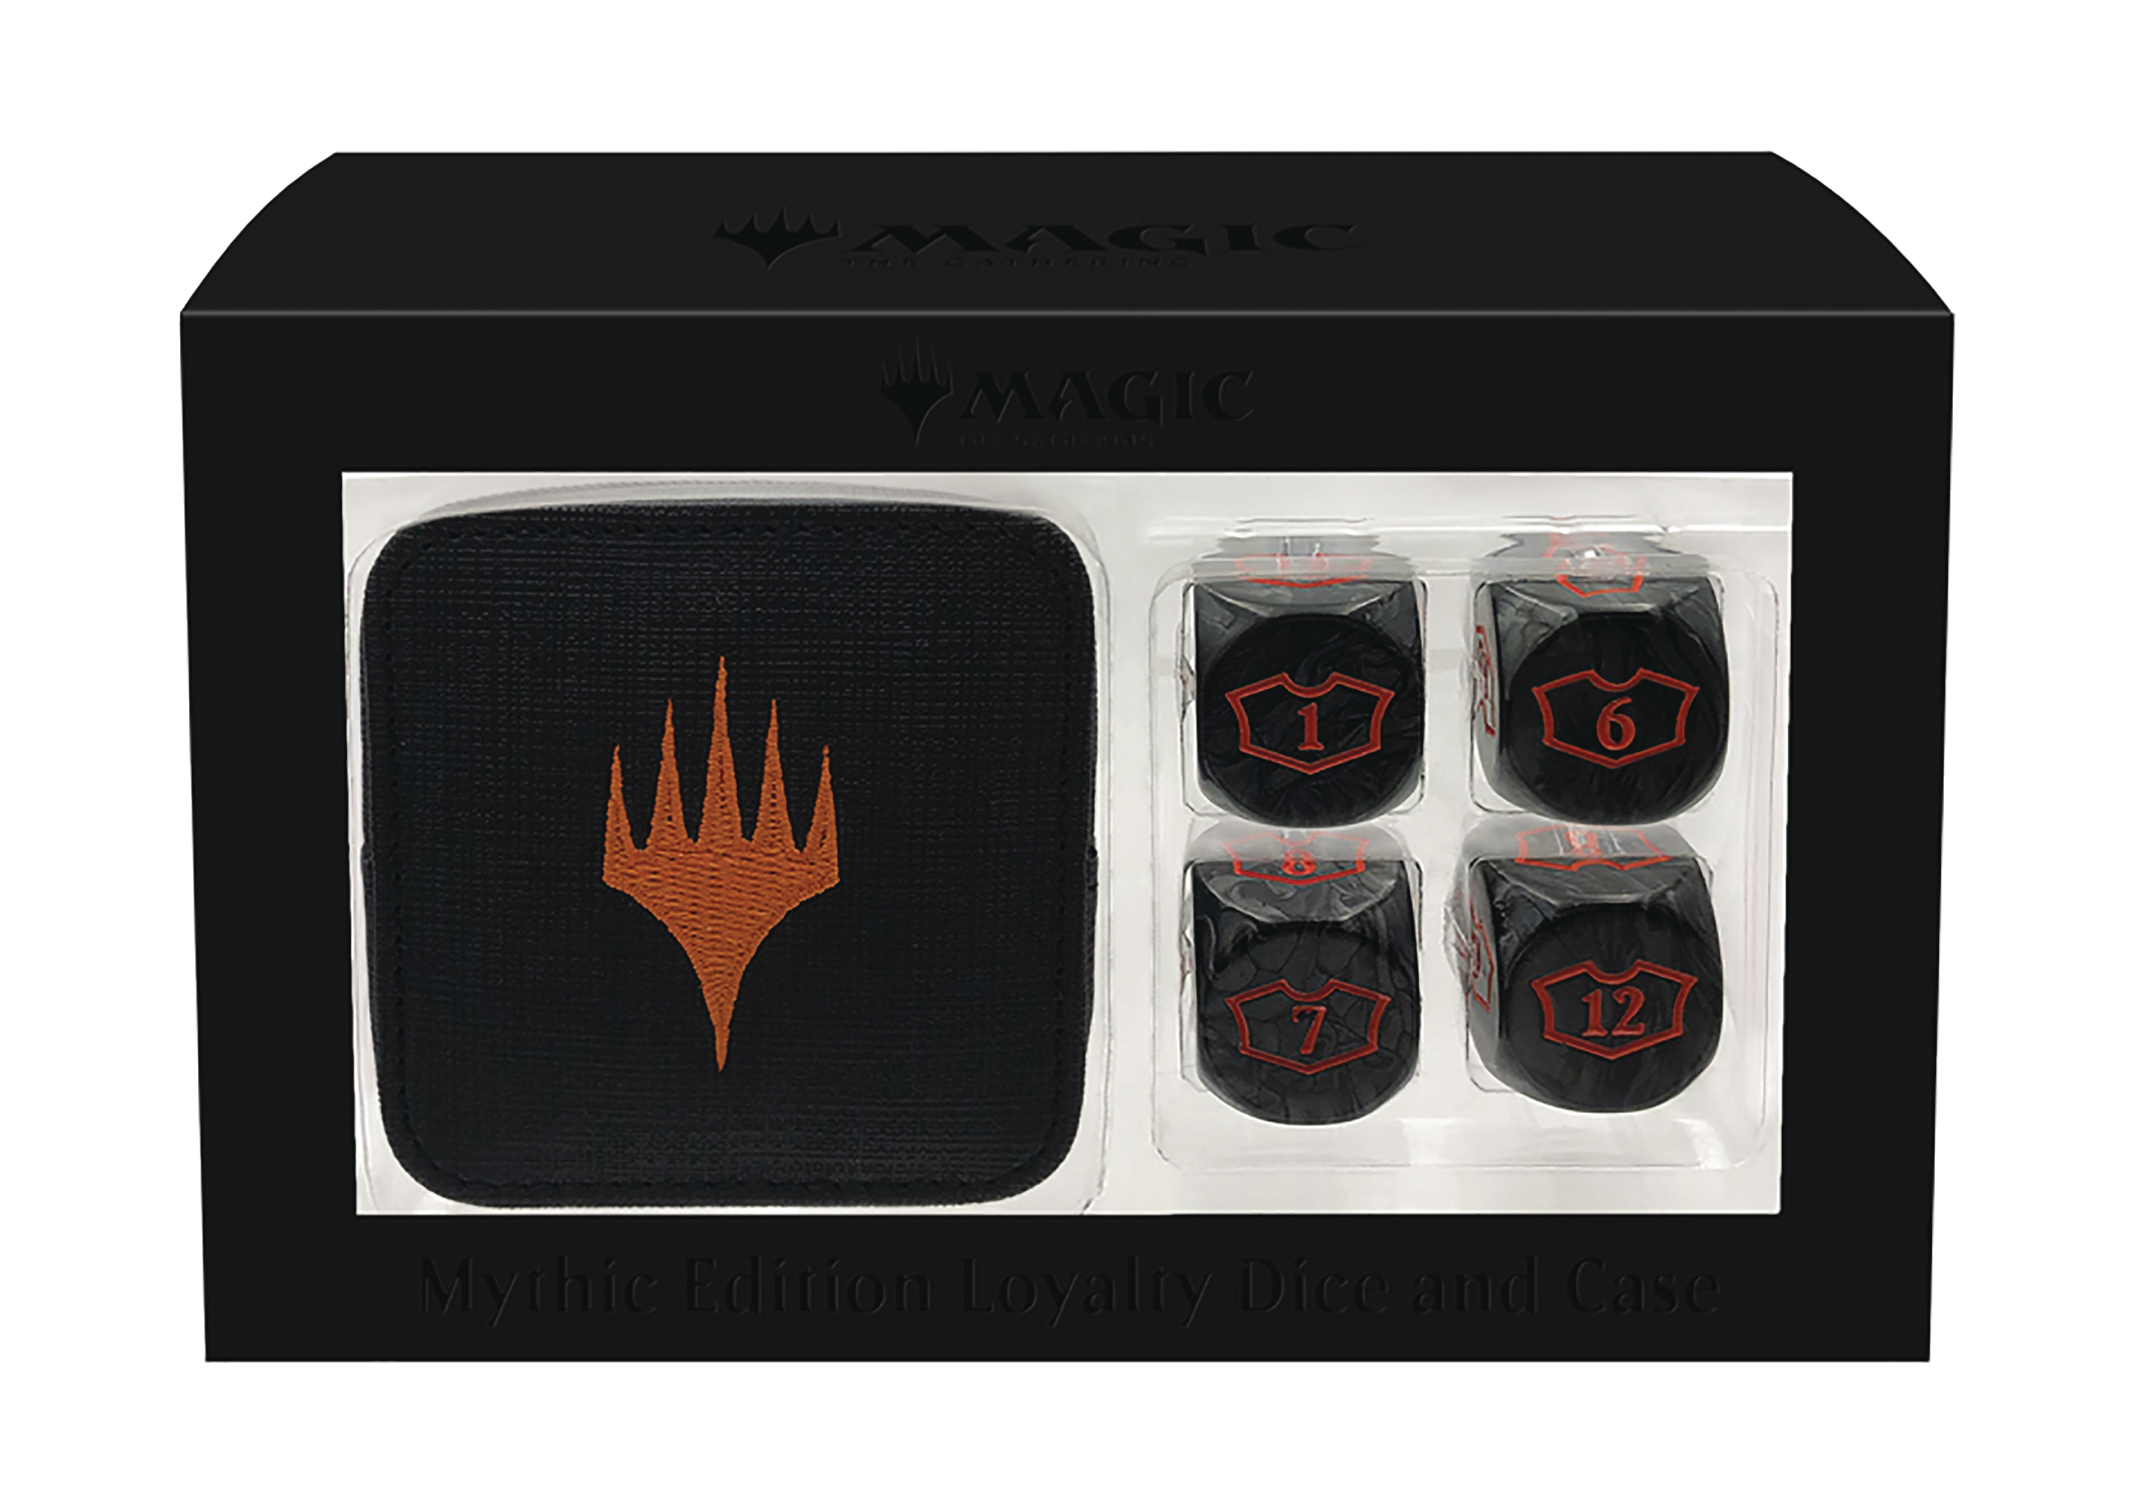 Magic The Gathering Mythic Edition Loyalty Dice & Case